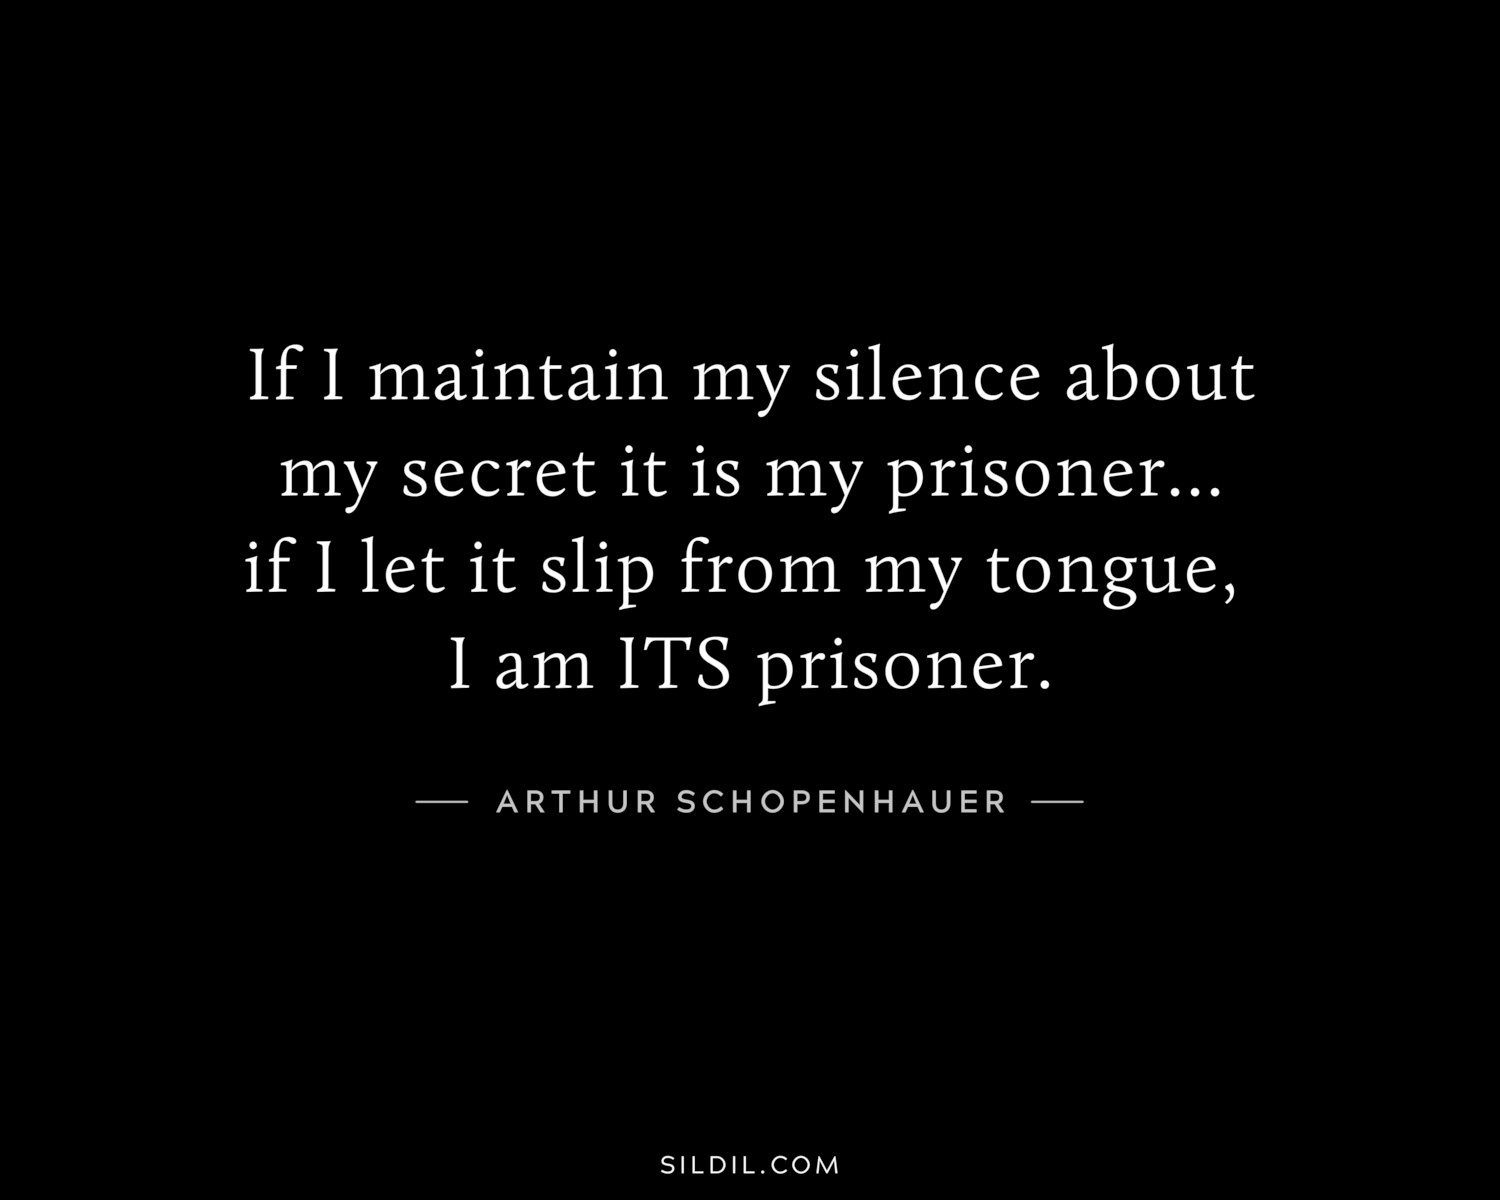 If I maintain my silence about my secret it is my prisoner...if I let it slip from my tongue, I am ITS prisoner.